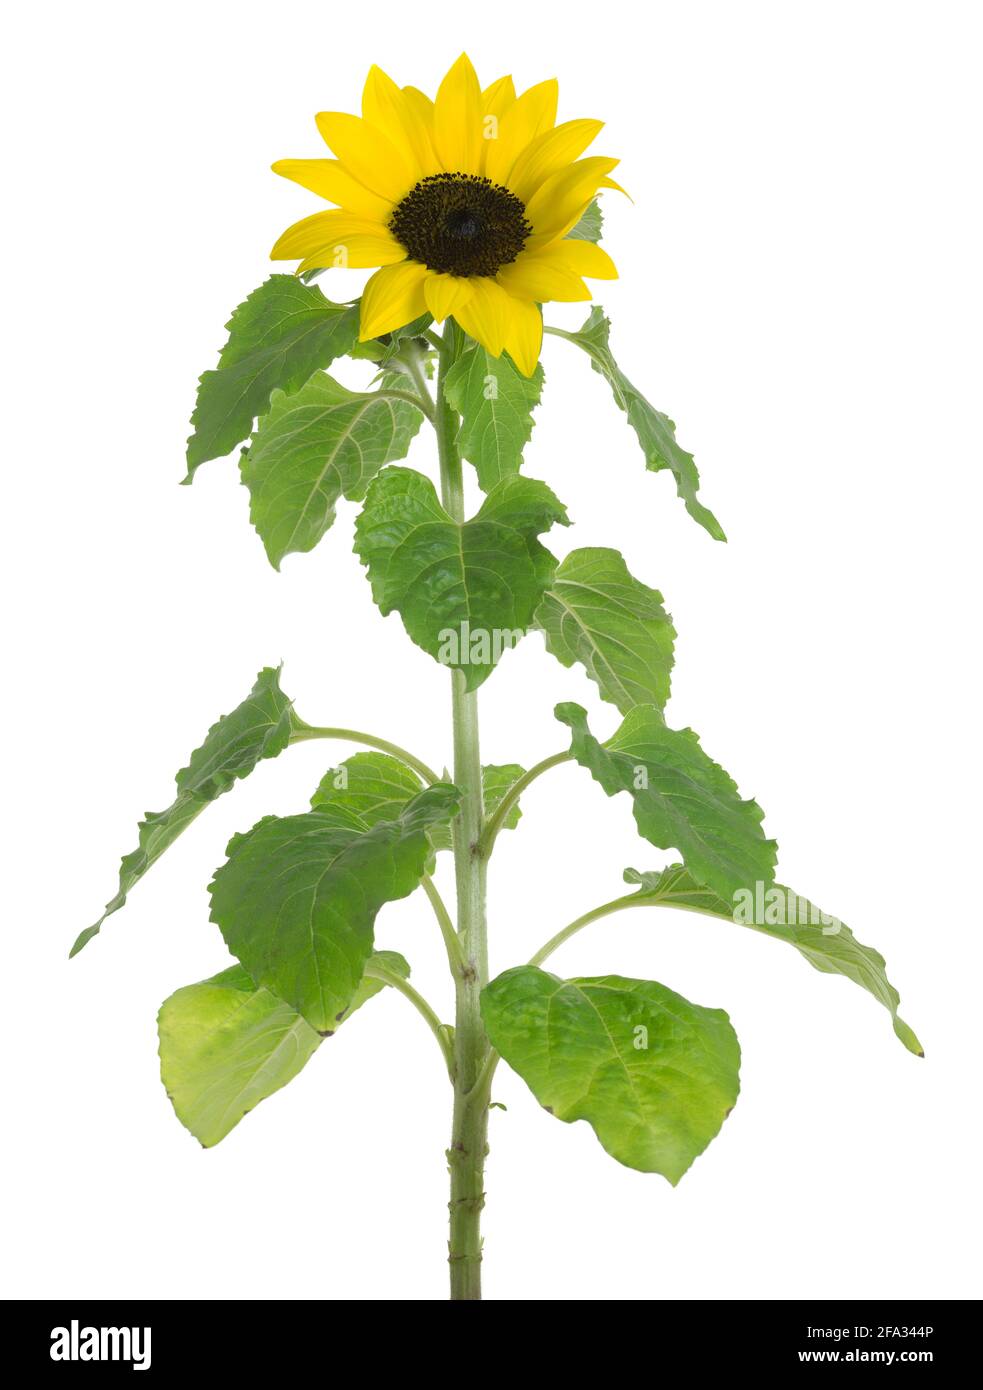 Blooming common sunflower Helianthus annuus, isolated on white background Stock Photo